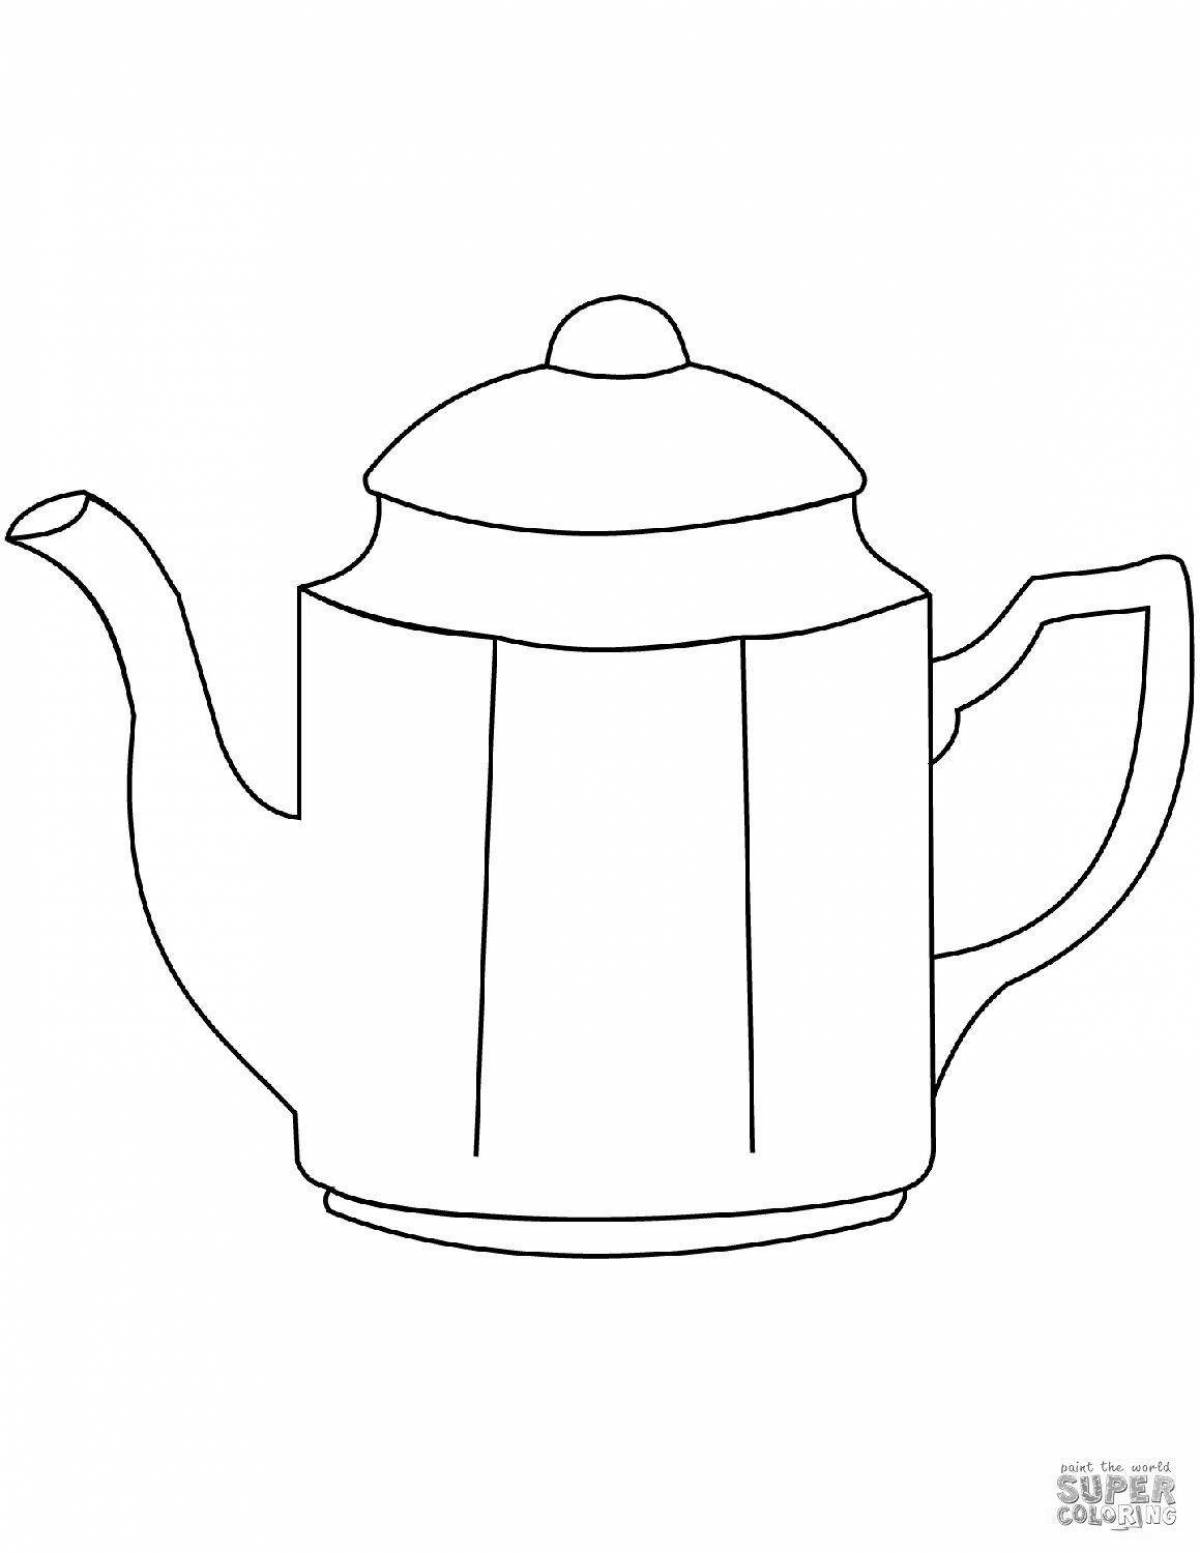 Wonderful teapot coloring book for 2-3 year olds